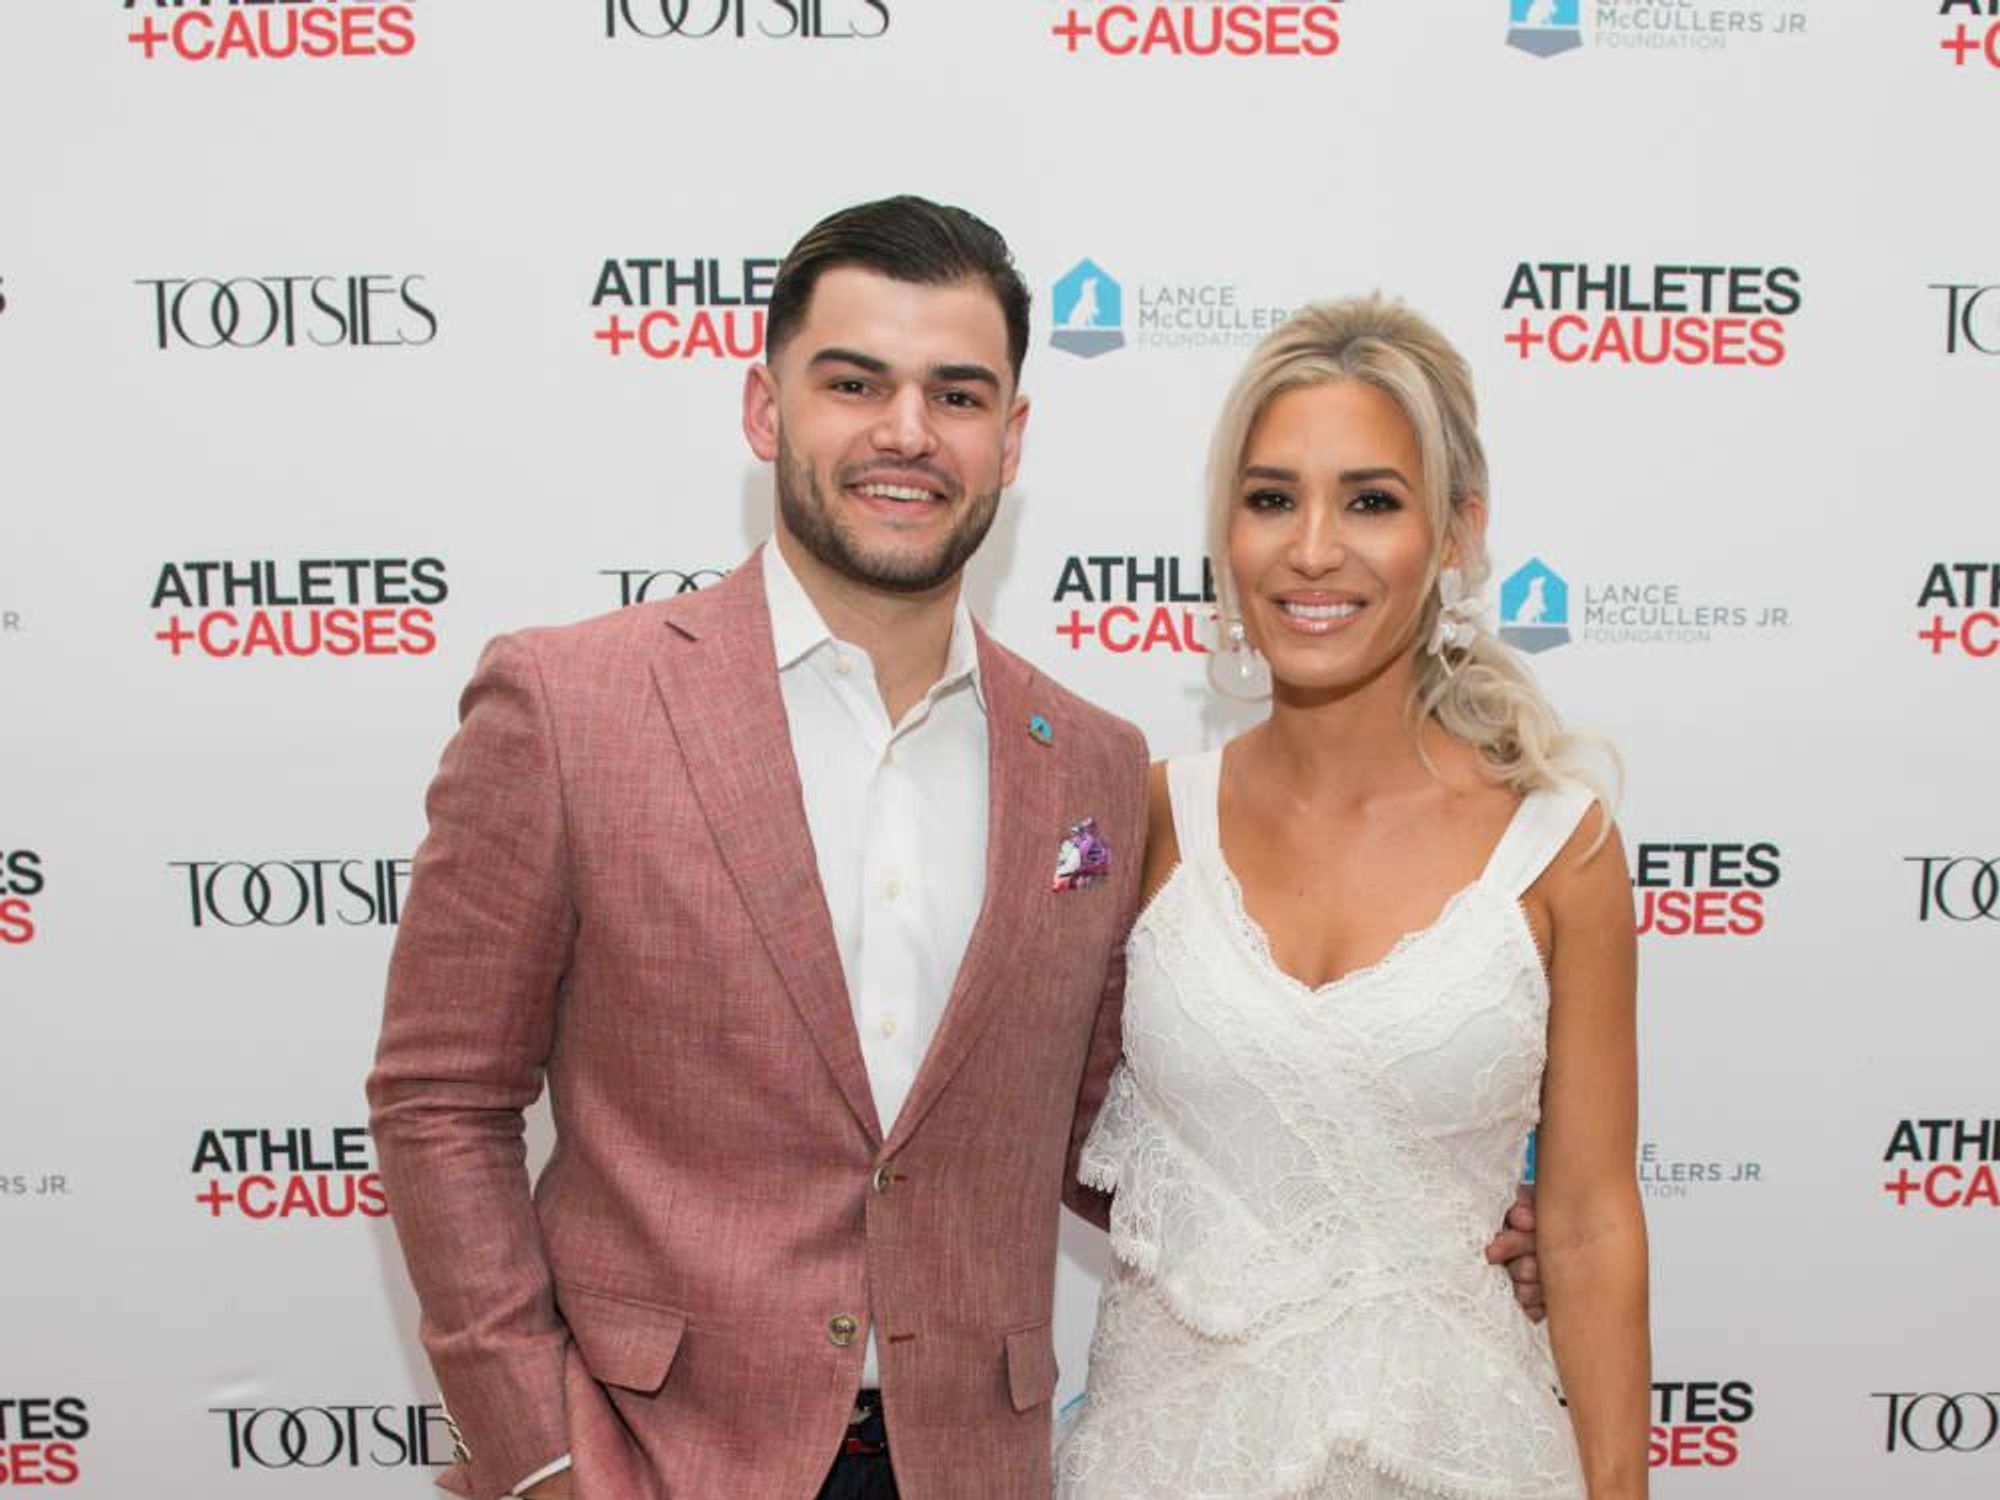 Houston Astros Team Up 4 Kids and K9s 2019 Lance and Kara McCullers